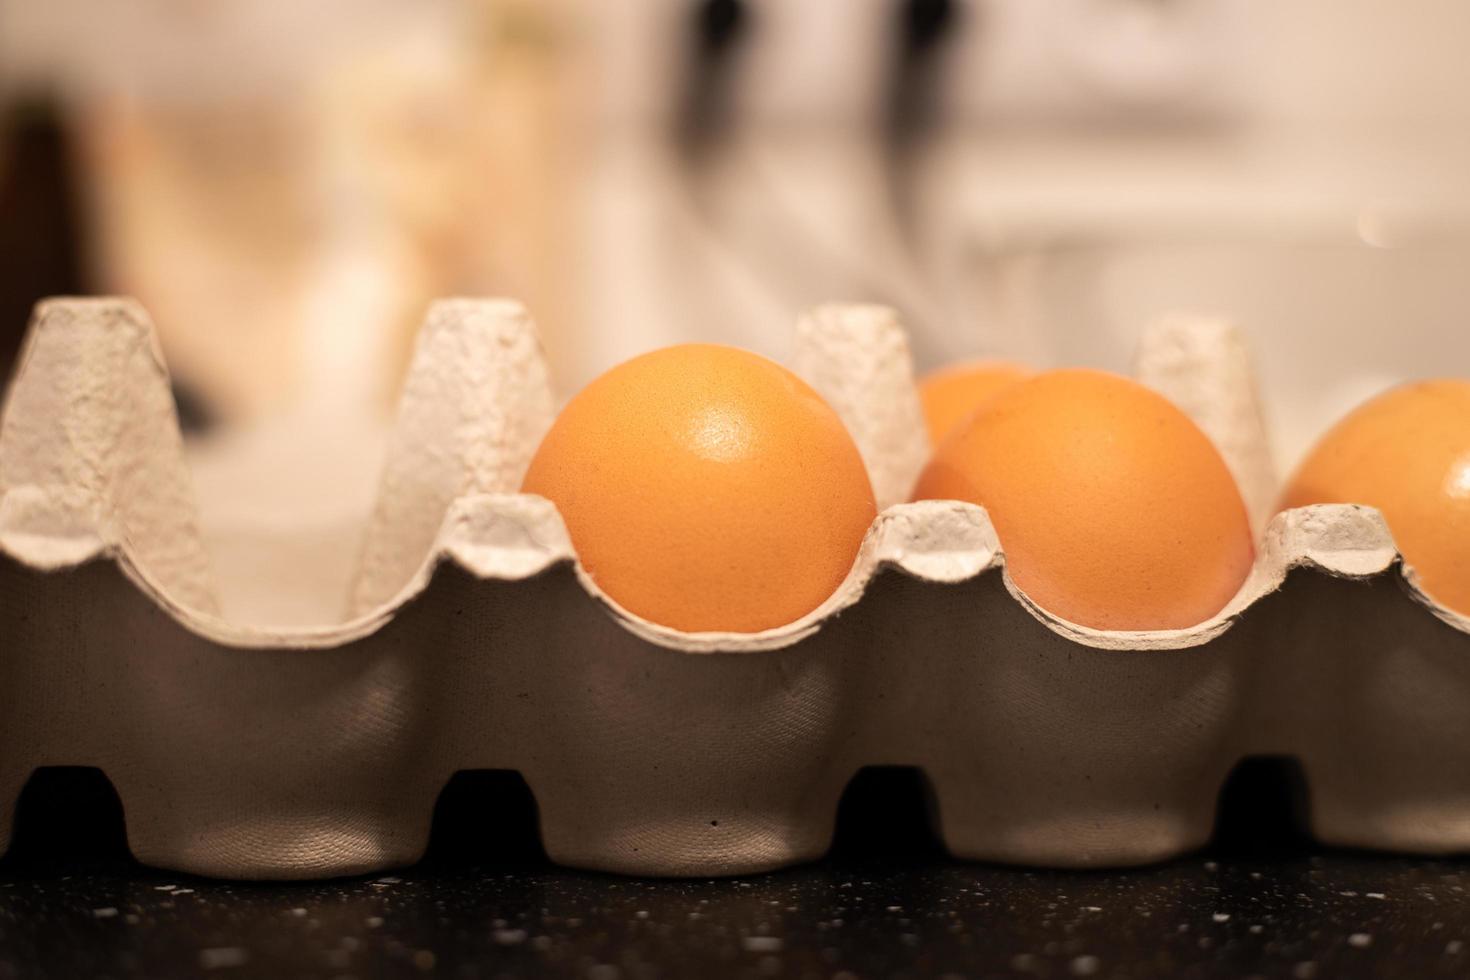 Eggs in a cardboard egg box. Preparation of ingredients for cooking. photo